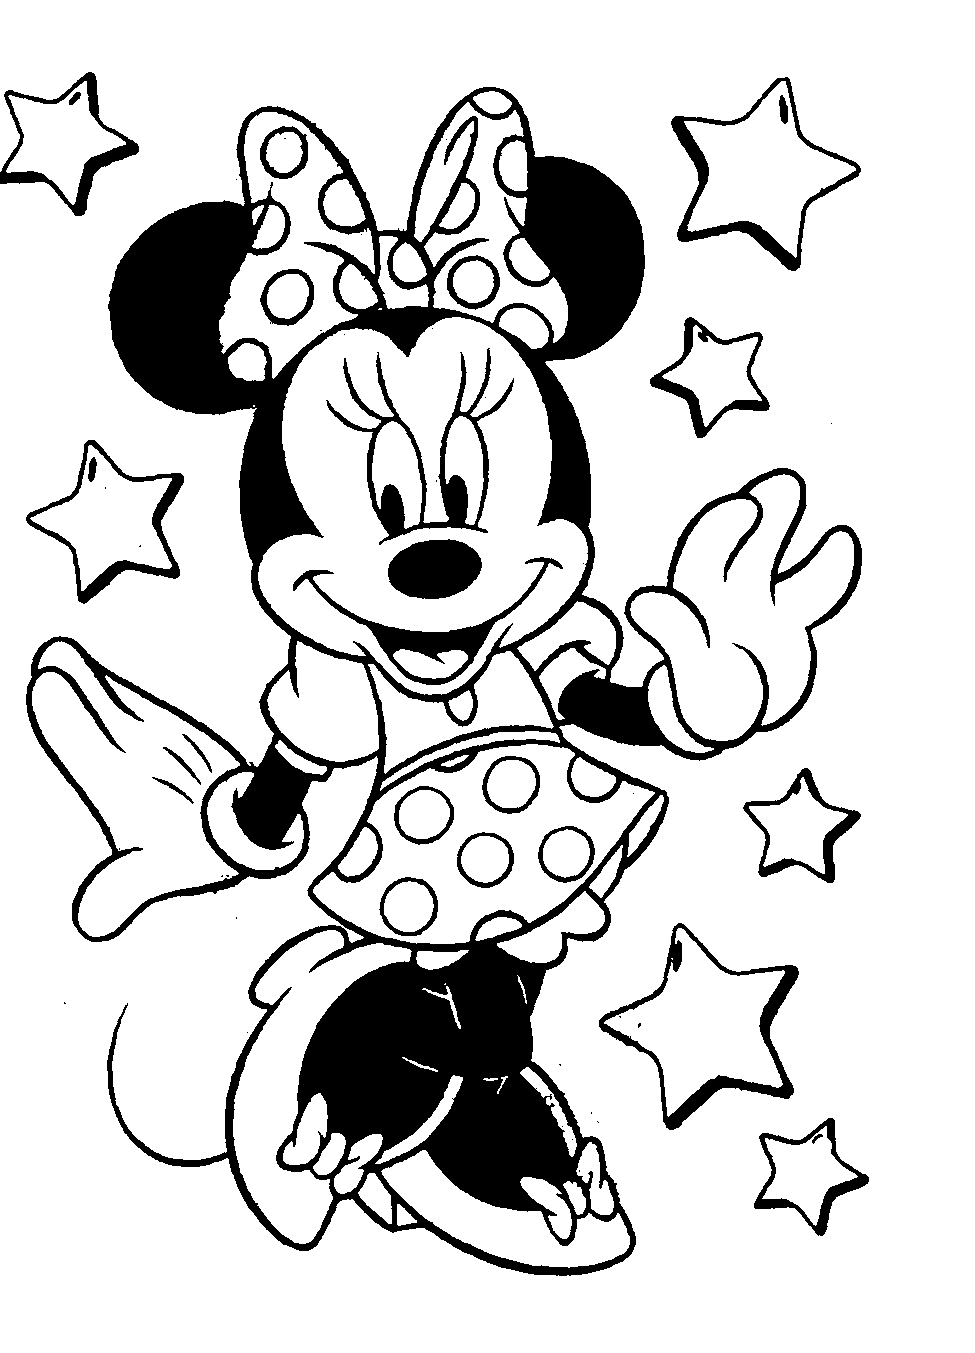 minnie mouse coloring misc minnie mouse coloring pages 2 disneyclipscom minnie coloring mouse 